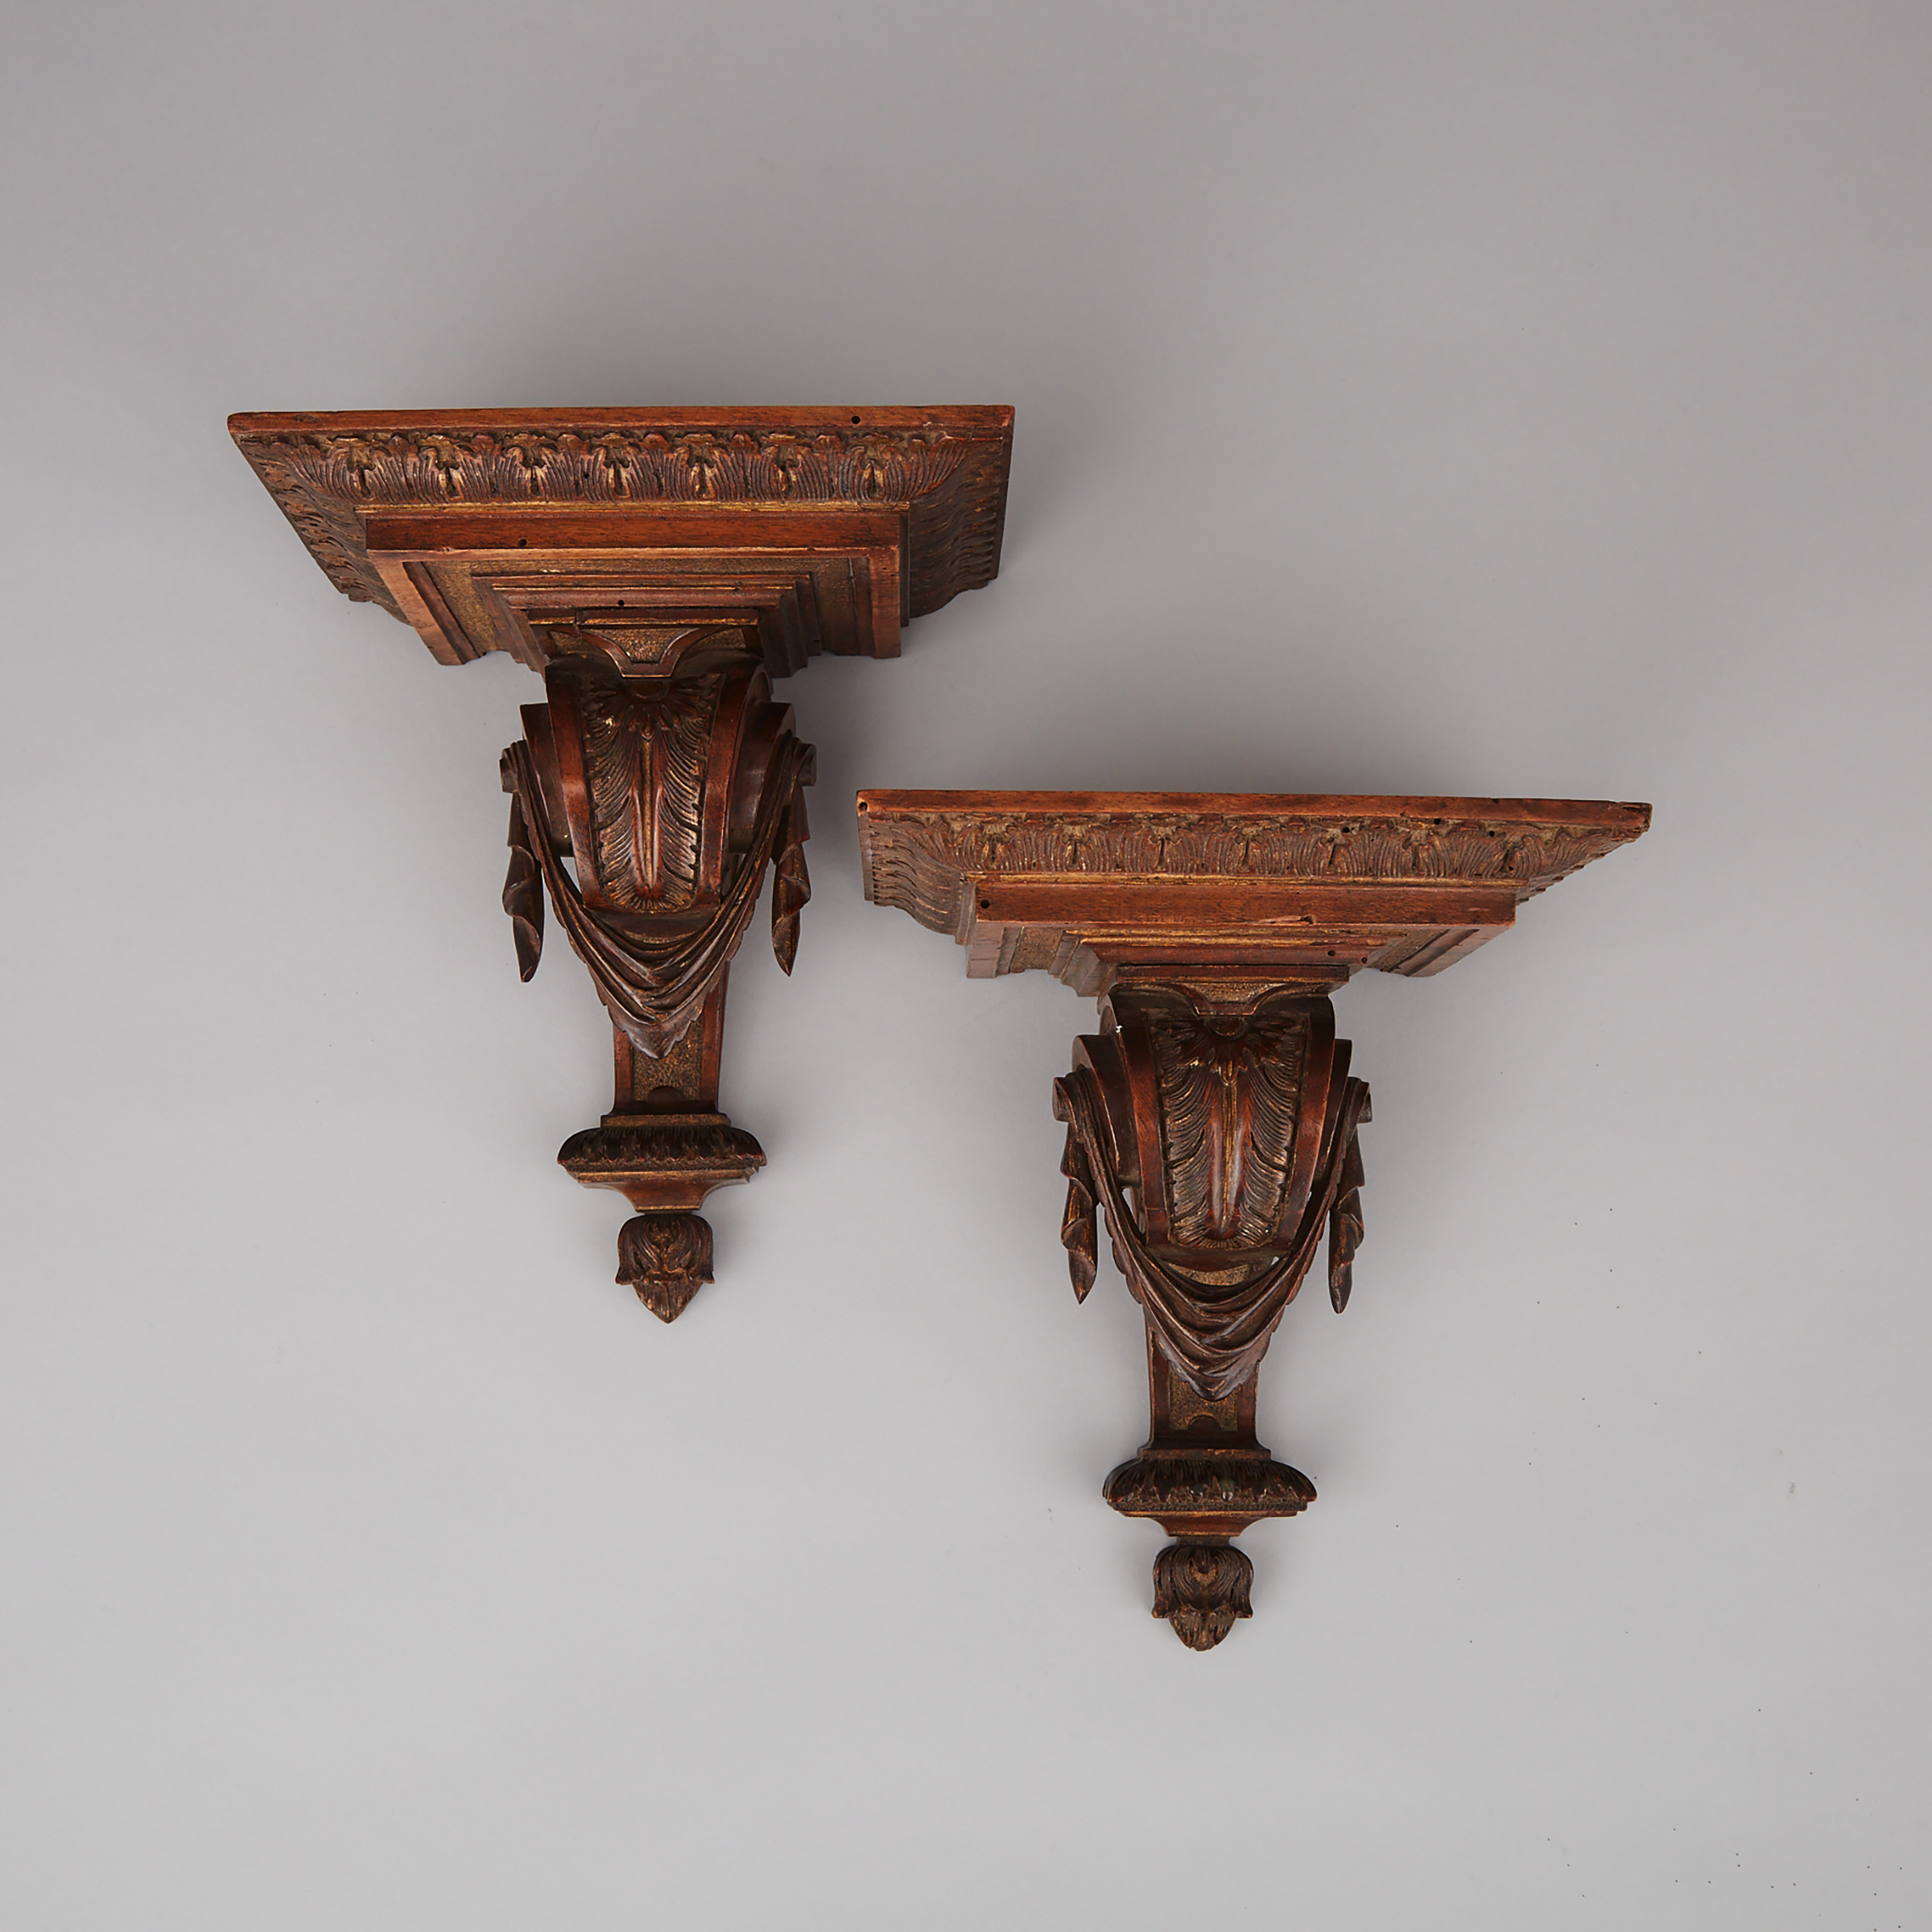 Pair of Neoclassical Parcel Gilt Carved Walnut Wall Brackets, 19th century